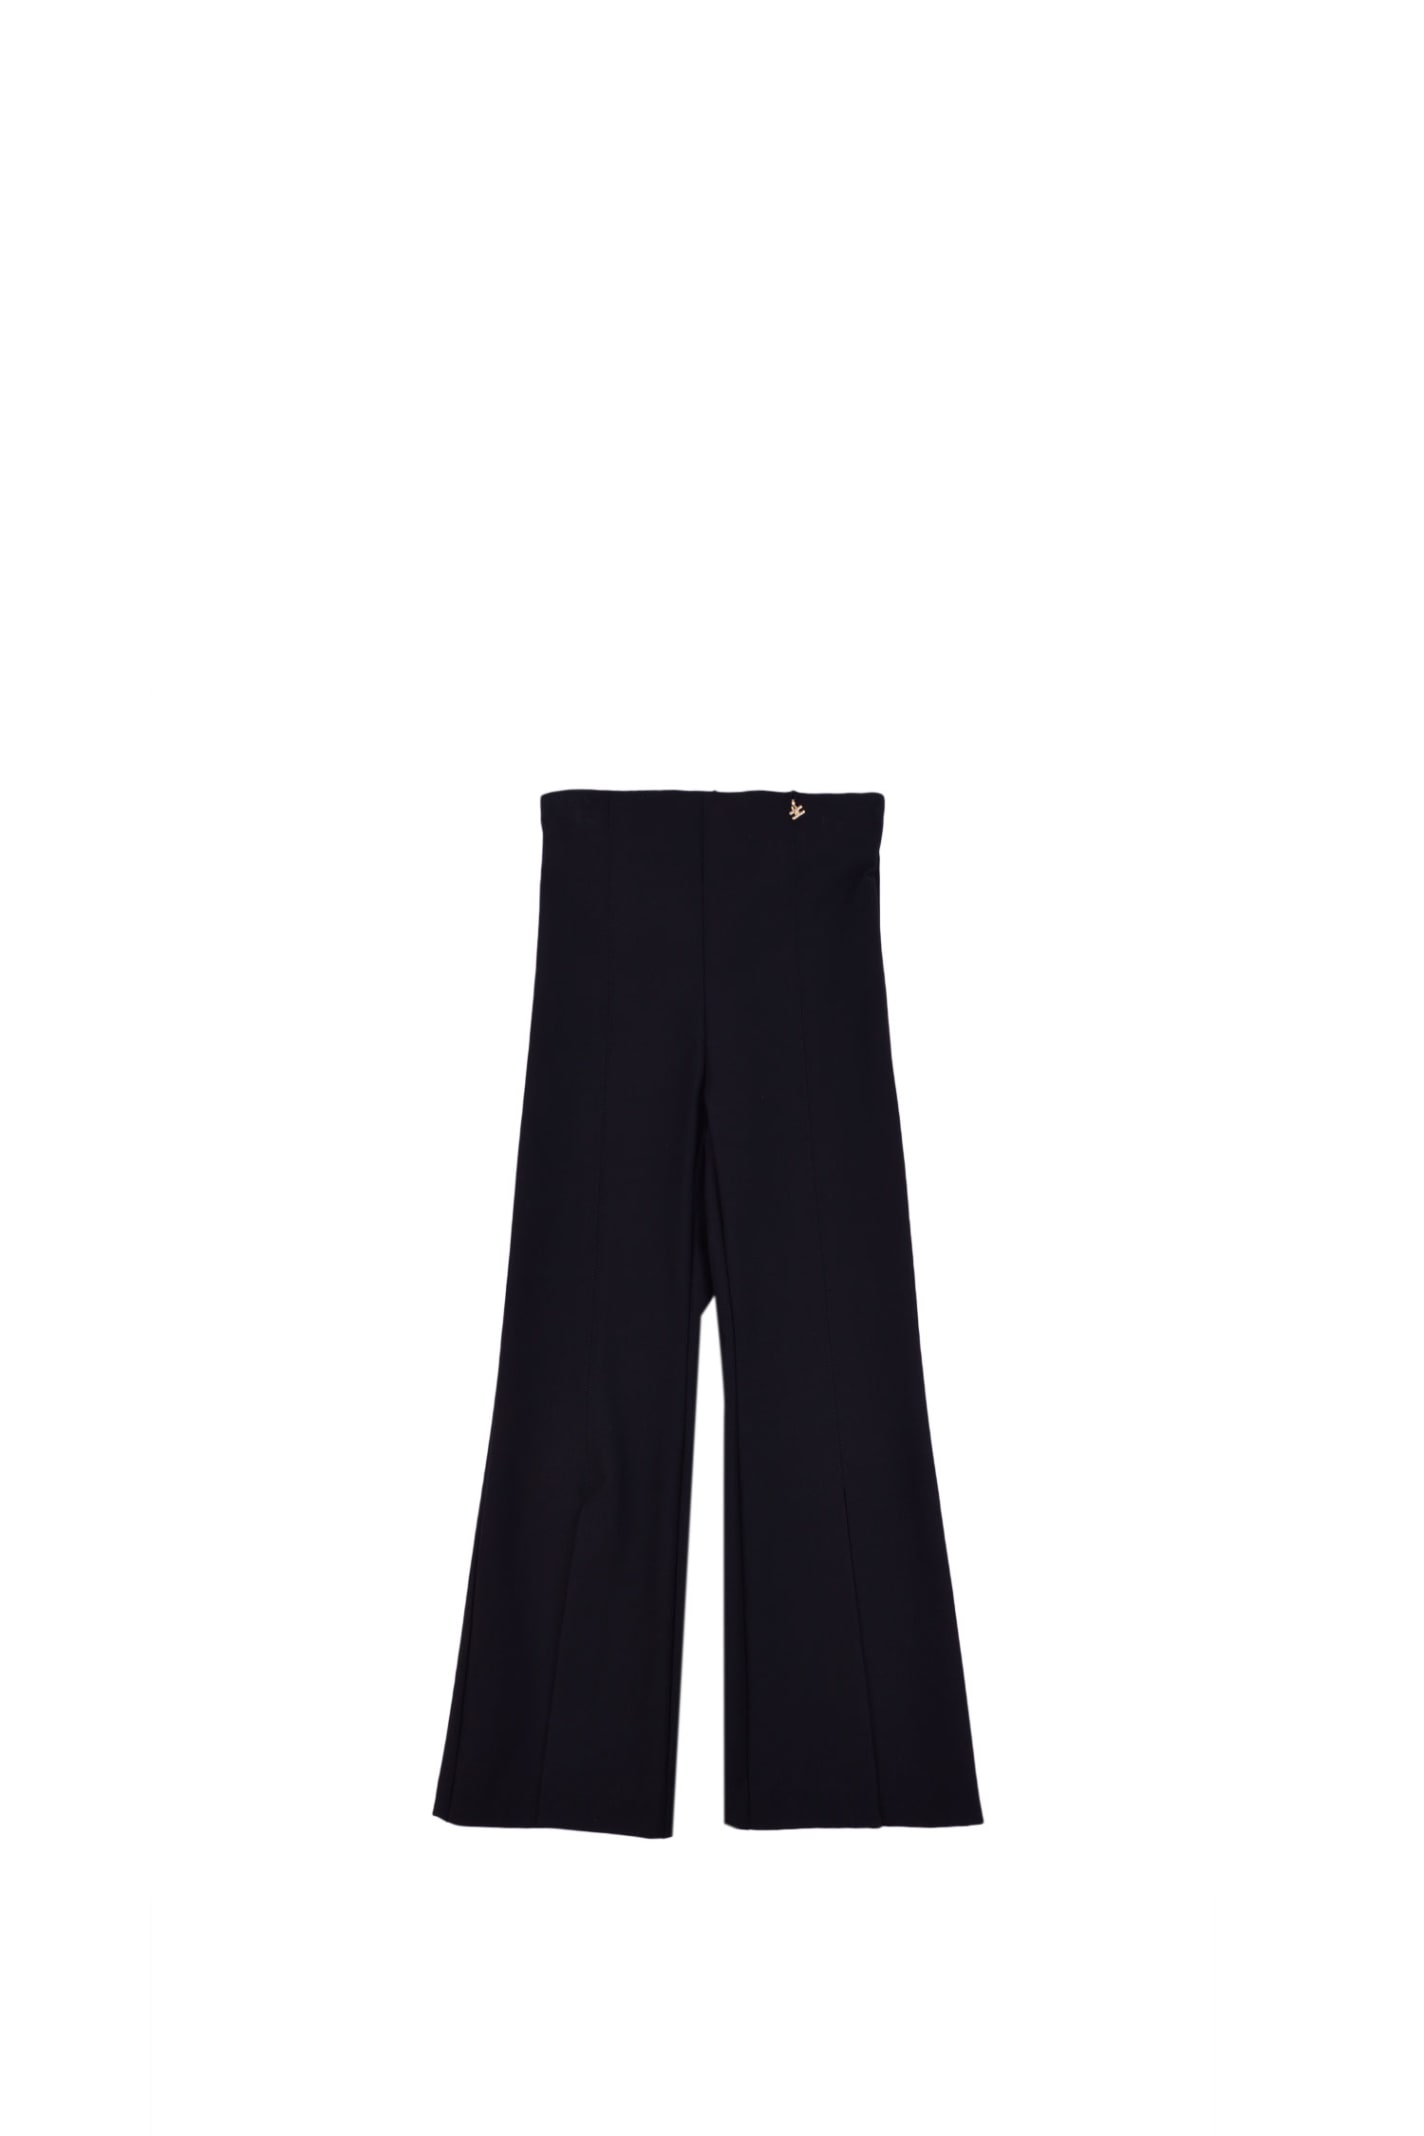 ELISABETTA FRANCHI FLARED TROUSERS WITH FRONT SPLIT